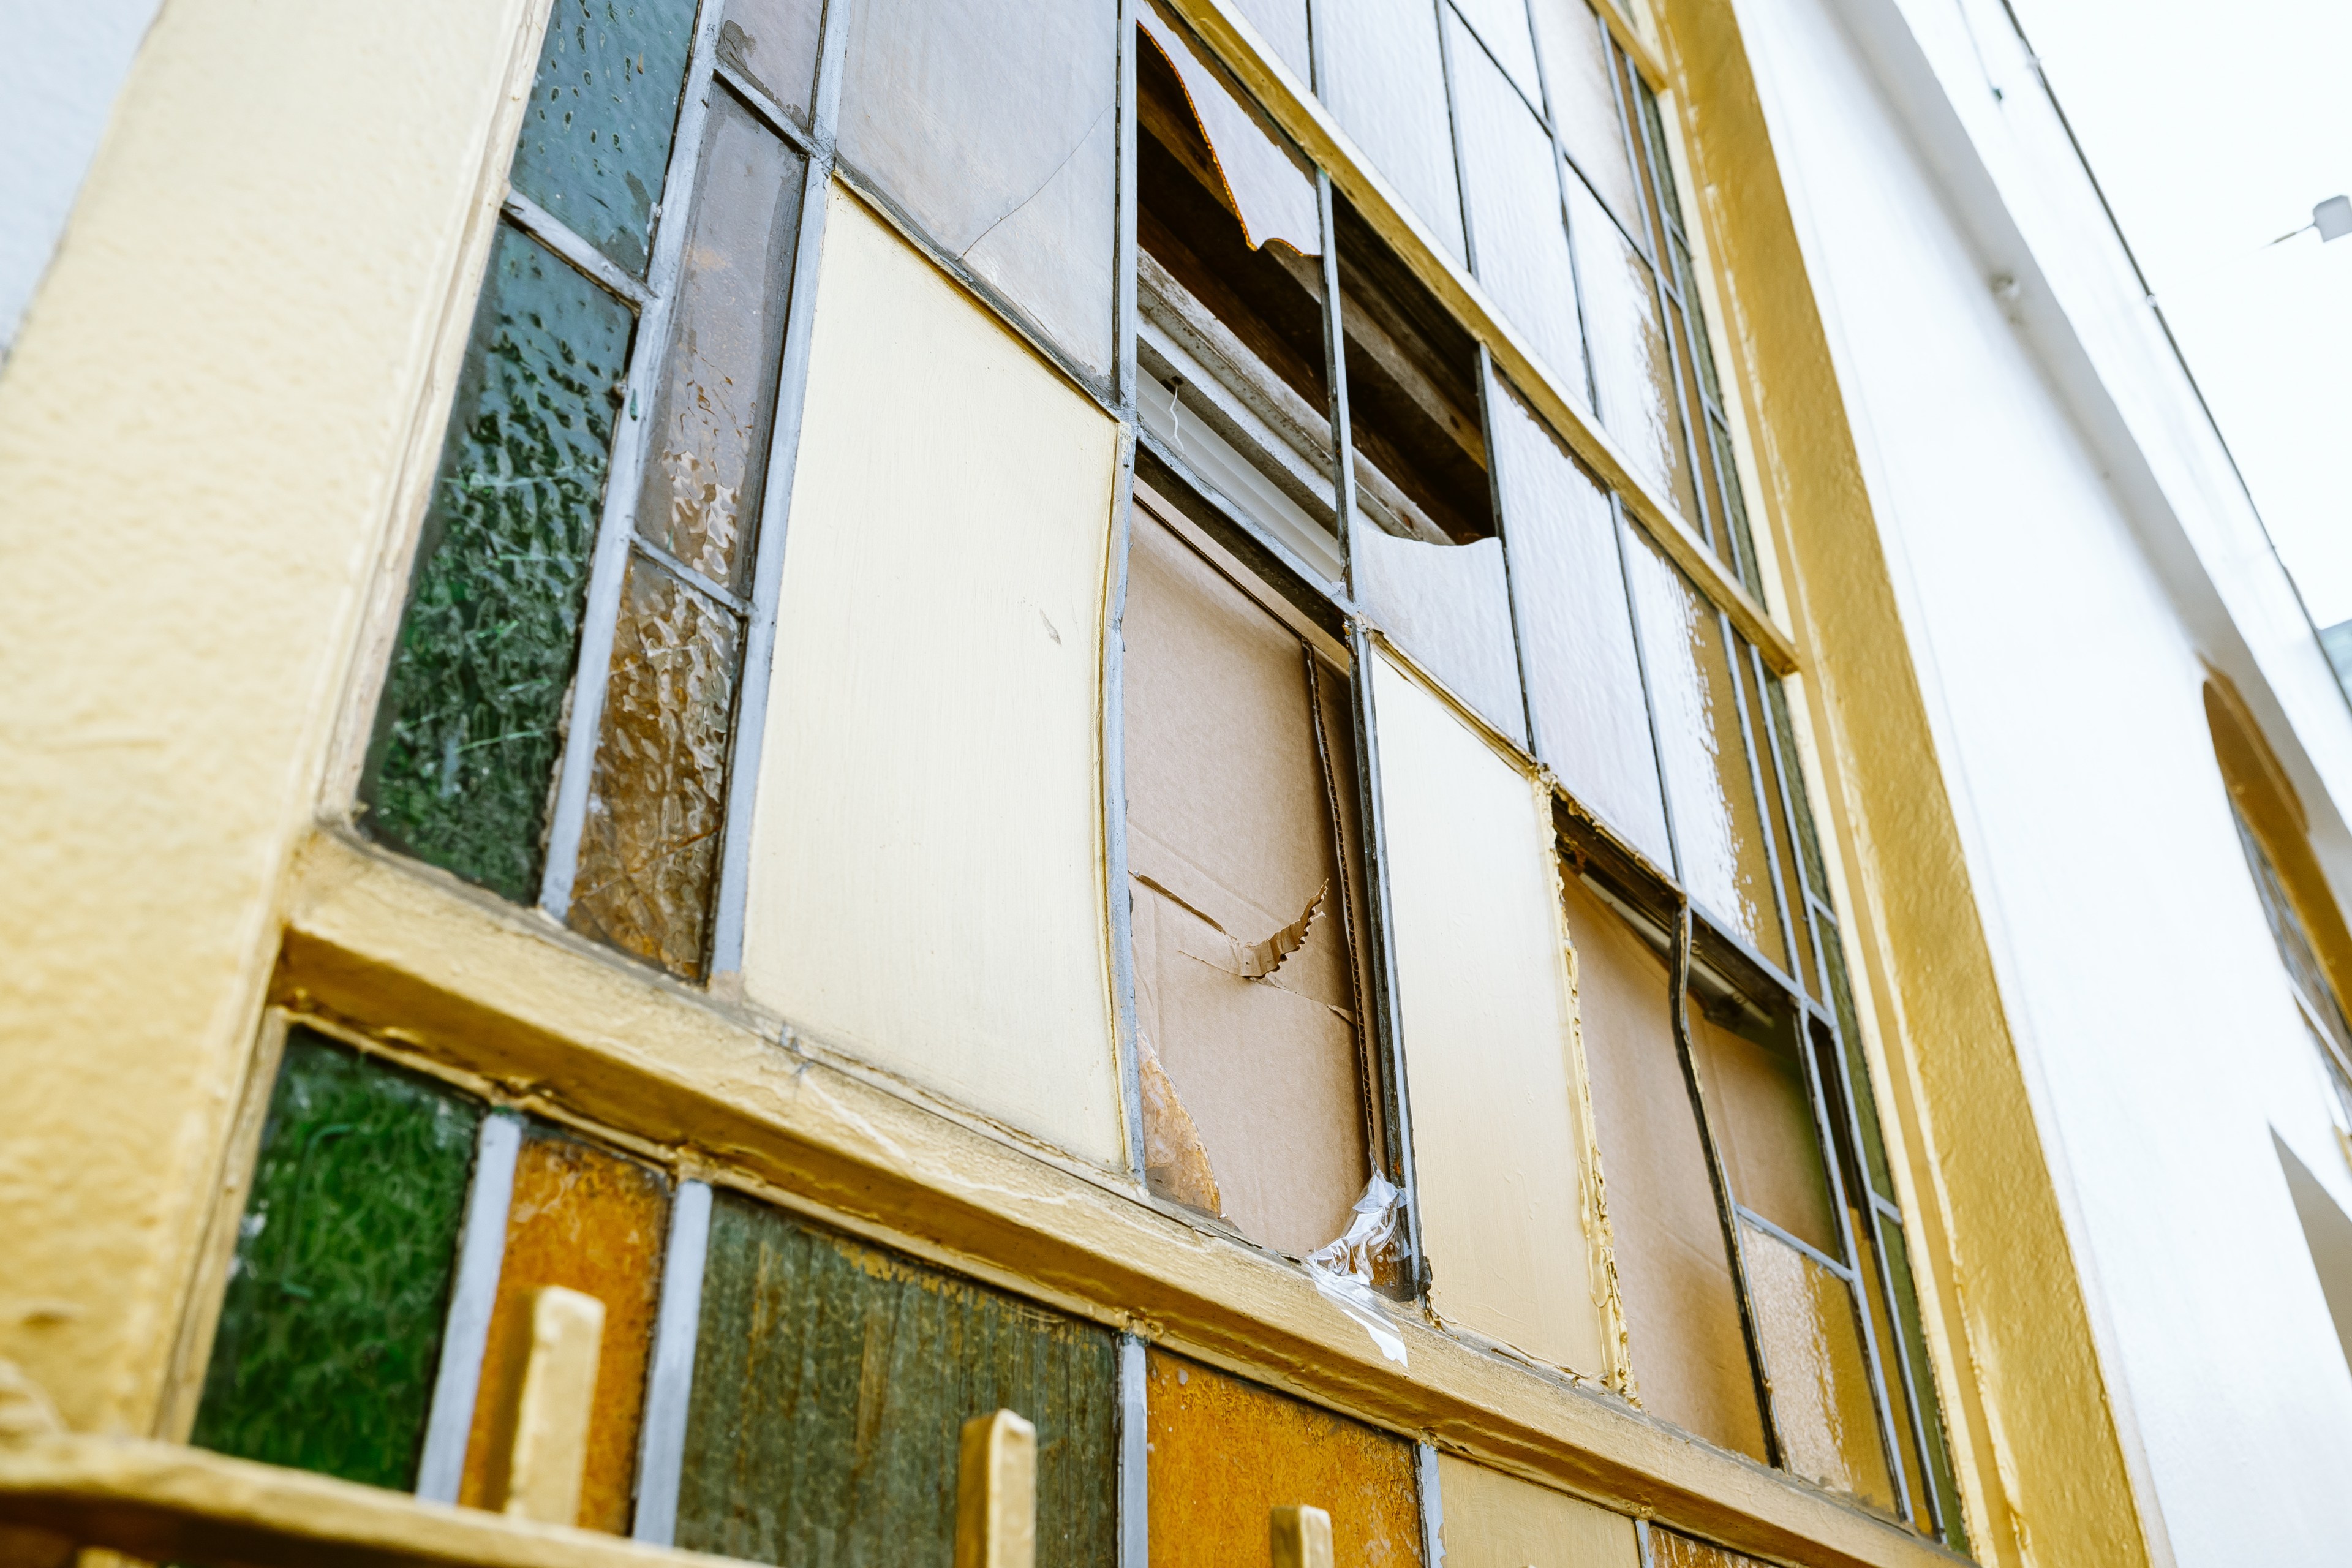 A broken stained-glass window with various colored panes, some shattered, in a yellow frame.